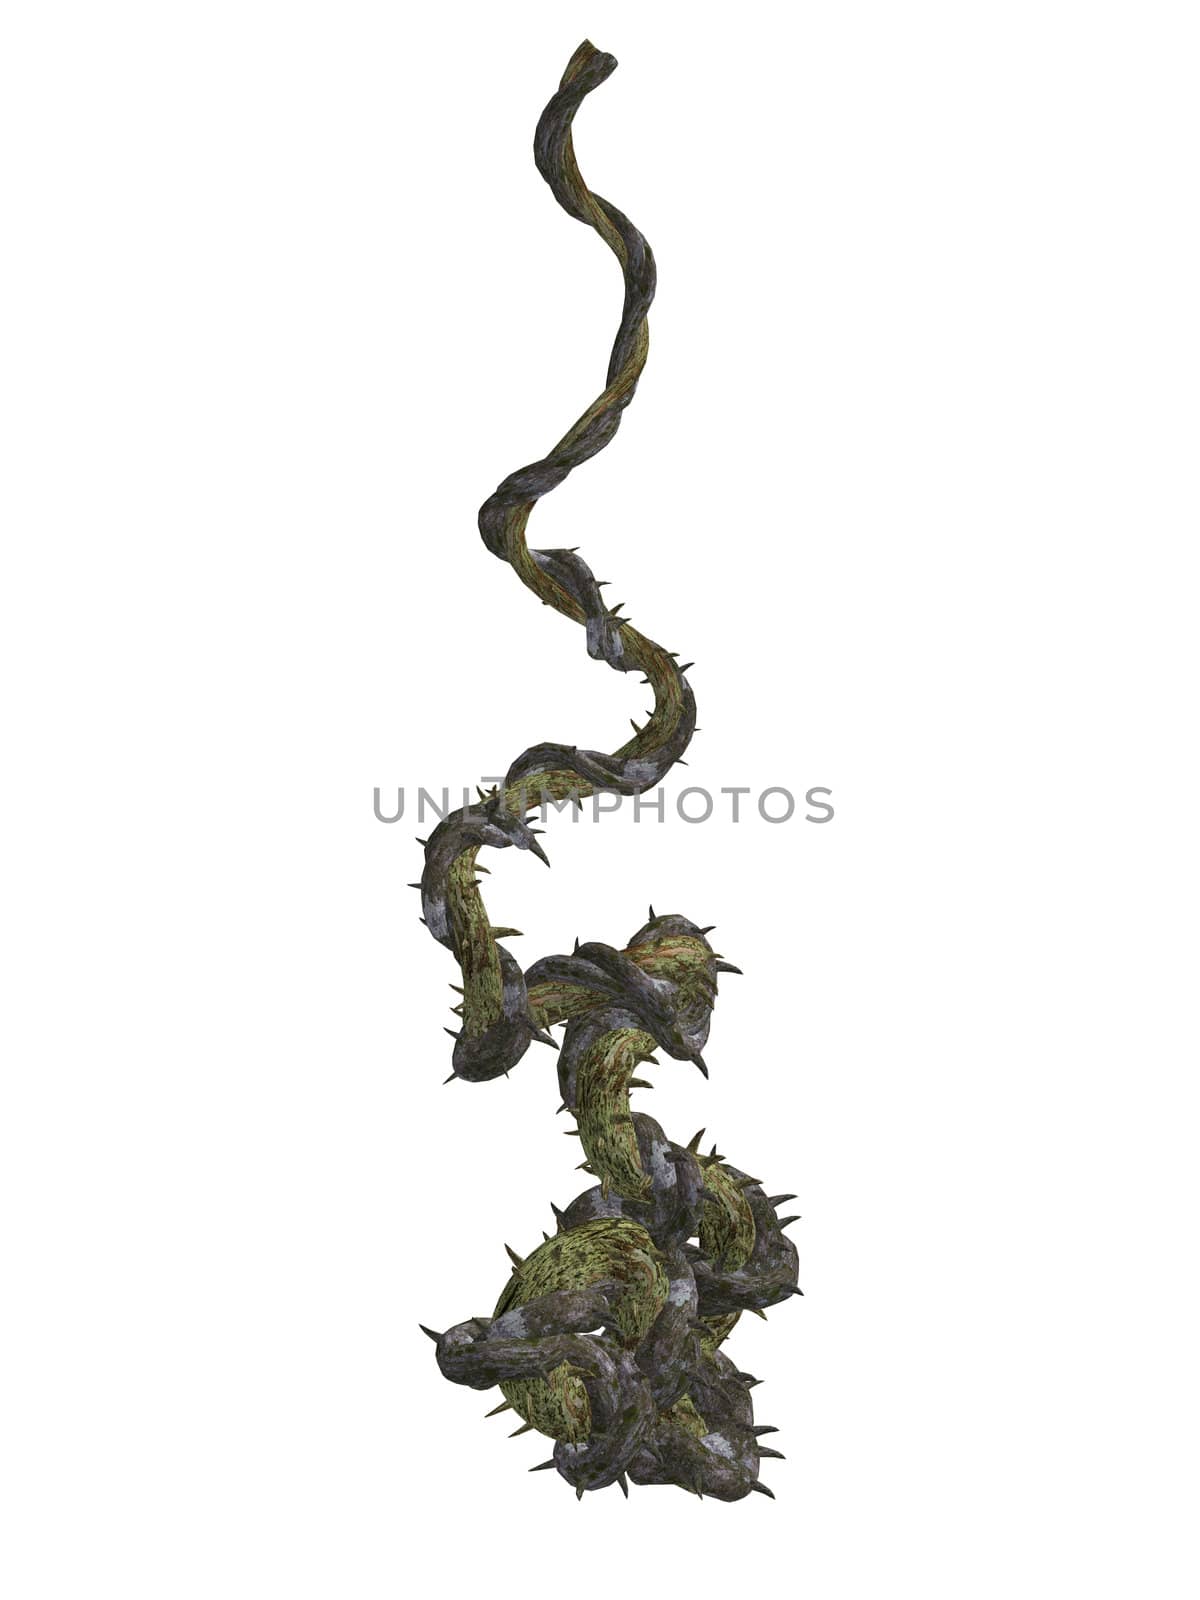 Climbing vines with thornes on a white background